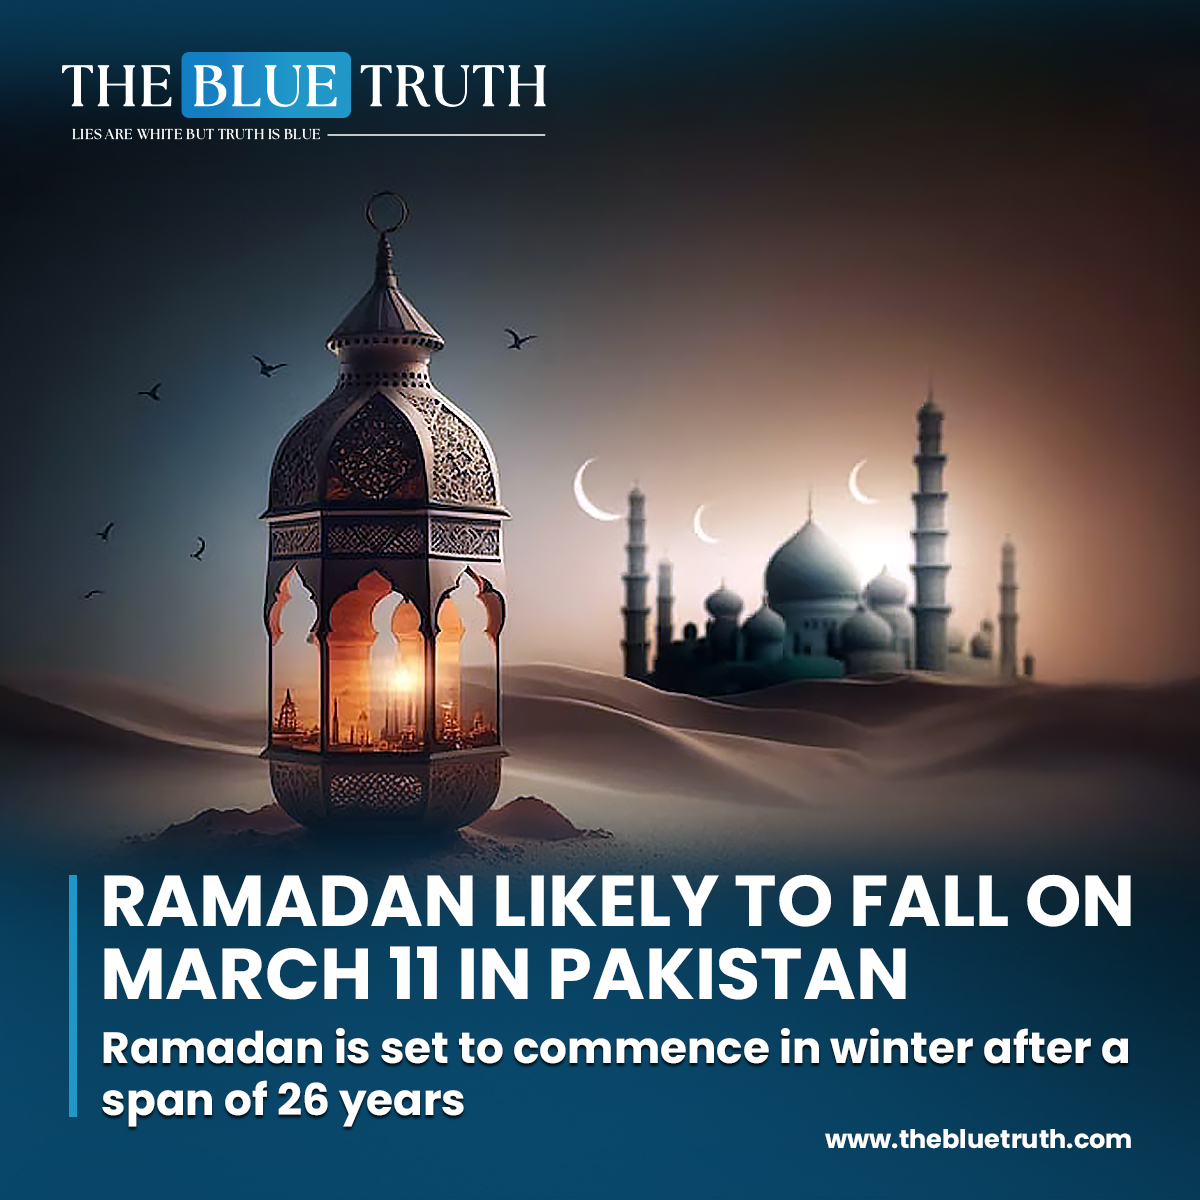 Astrologers suggest that the first day of fasting in Pakistan, Saudi Arabia, and other Gulf countries is anticipated to fall on March 11.
#RamadanForecast #FastingSeason #AstrologicalPrediction #IslamicCalendar
#RamadanPreparation #SpiritualJourney #tbt #TheBlueTruth